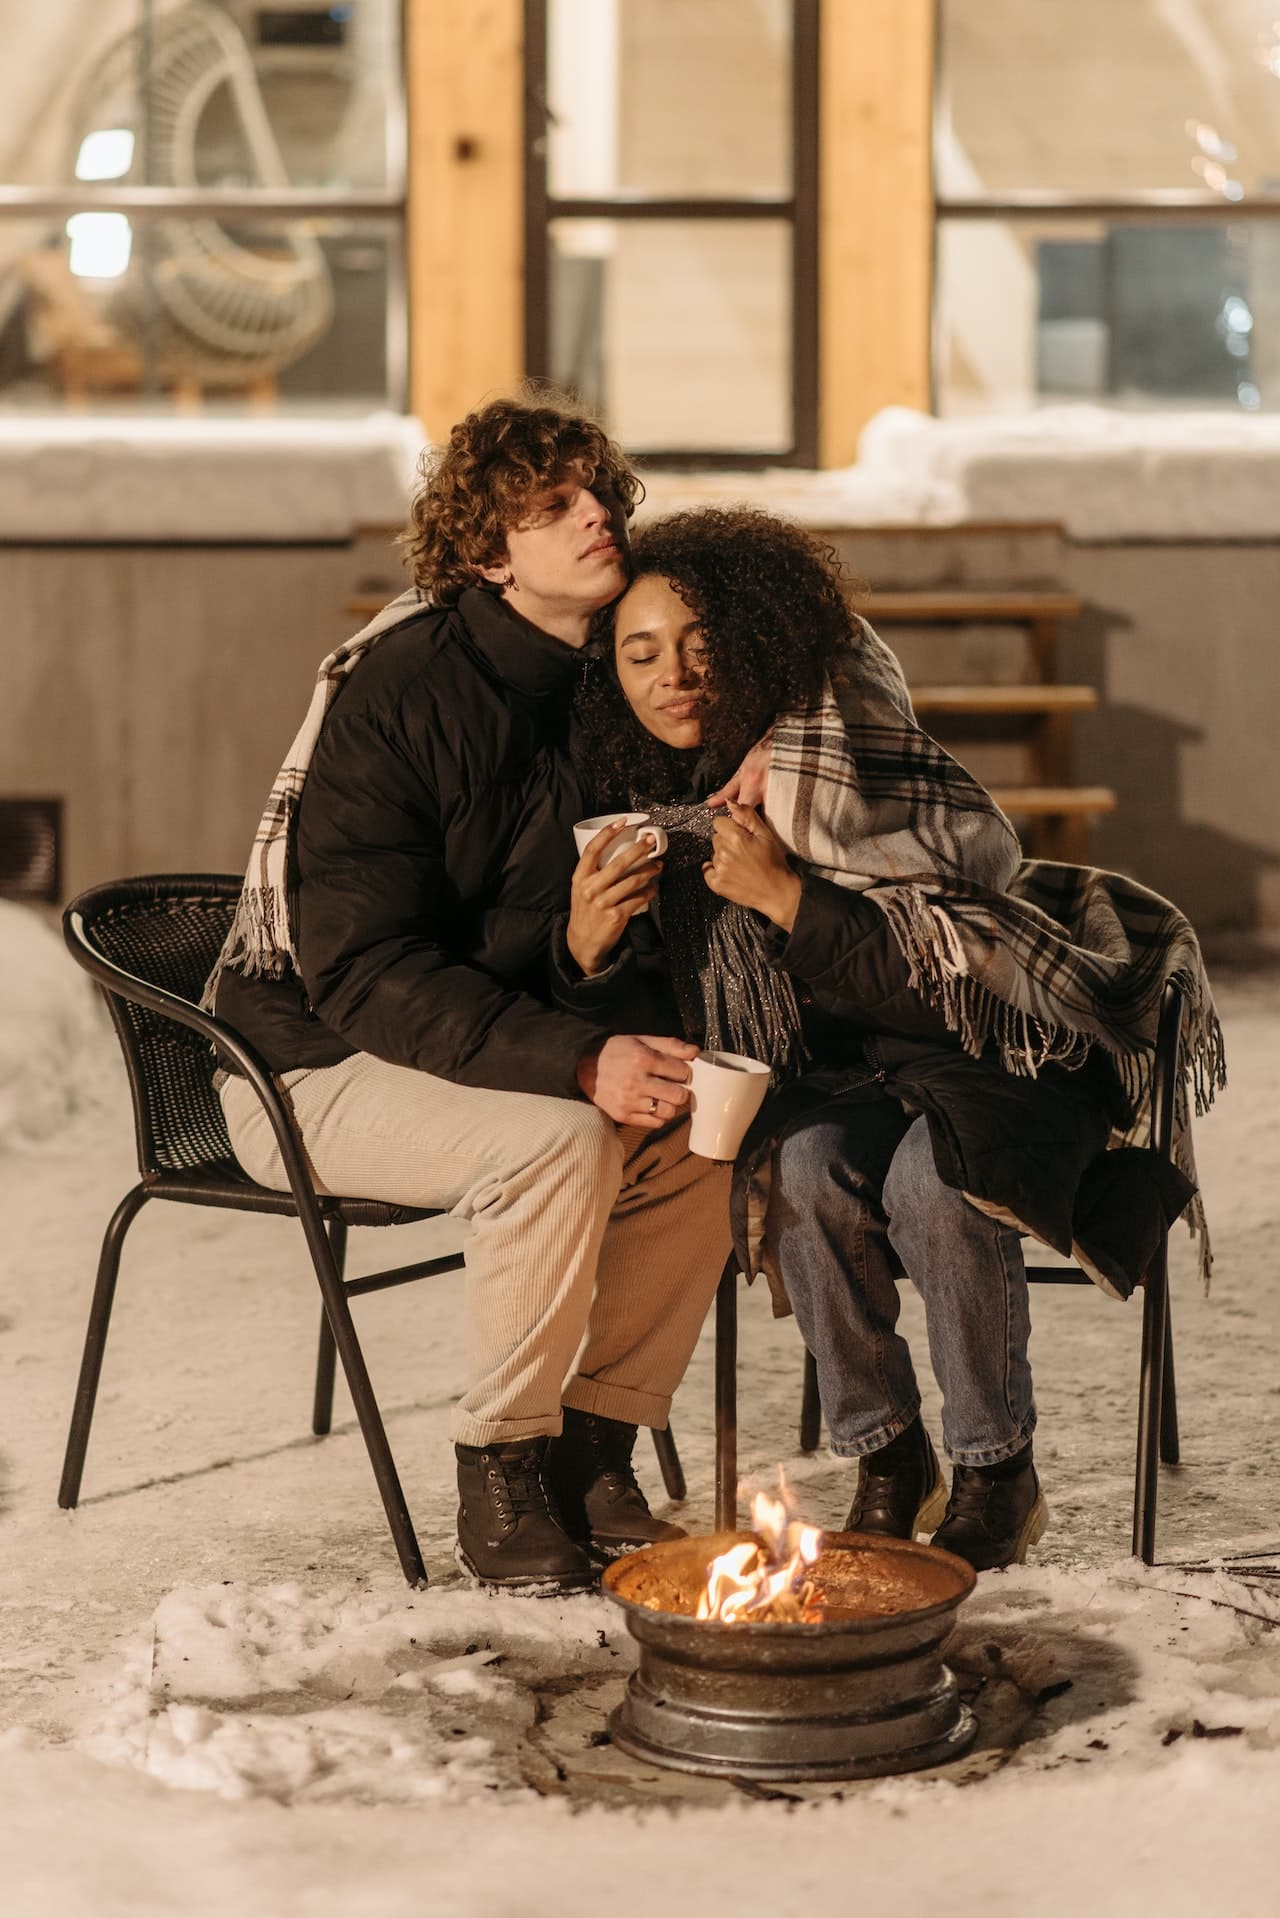 A young couple cuddles outdoors by a fire, wrapped in blankets.